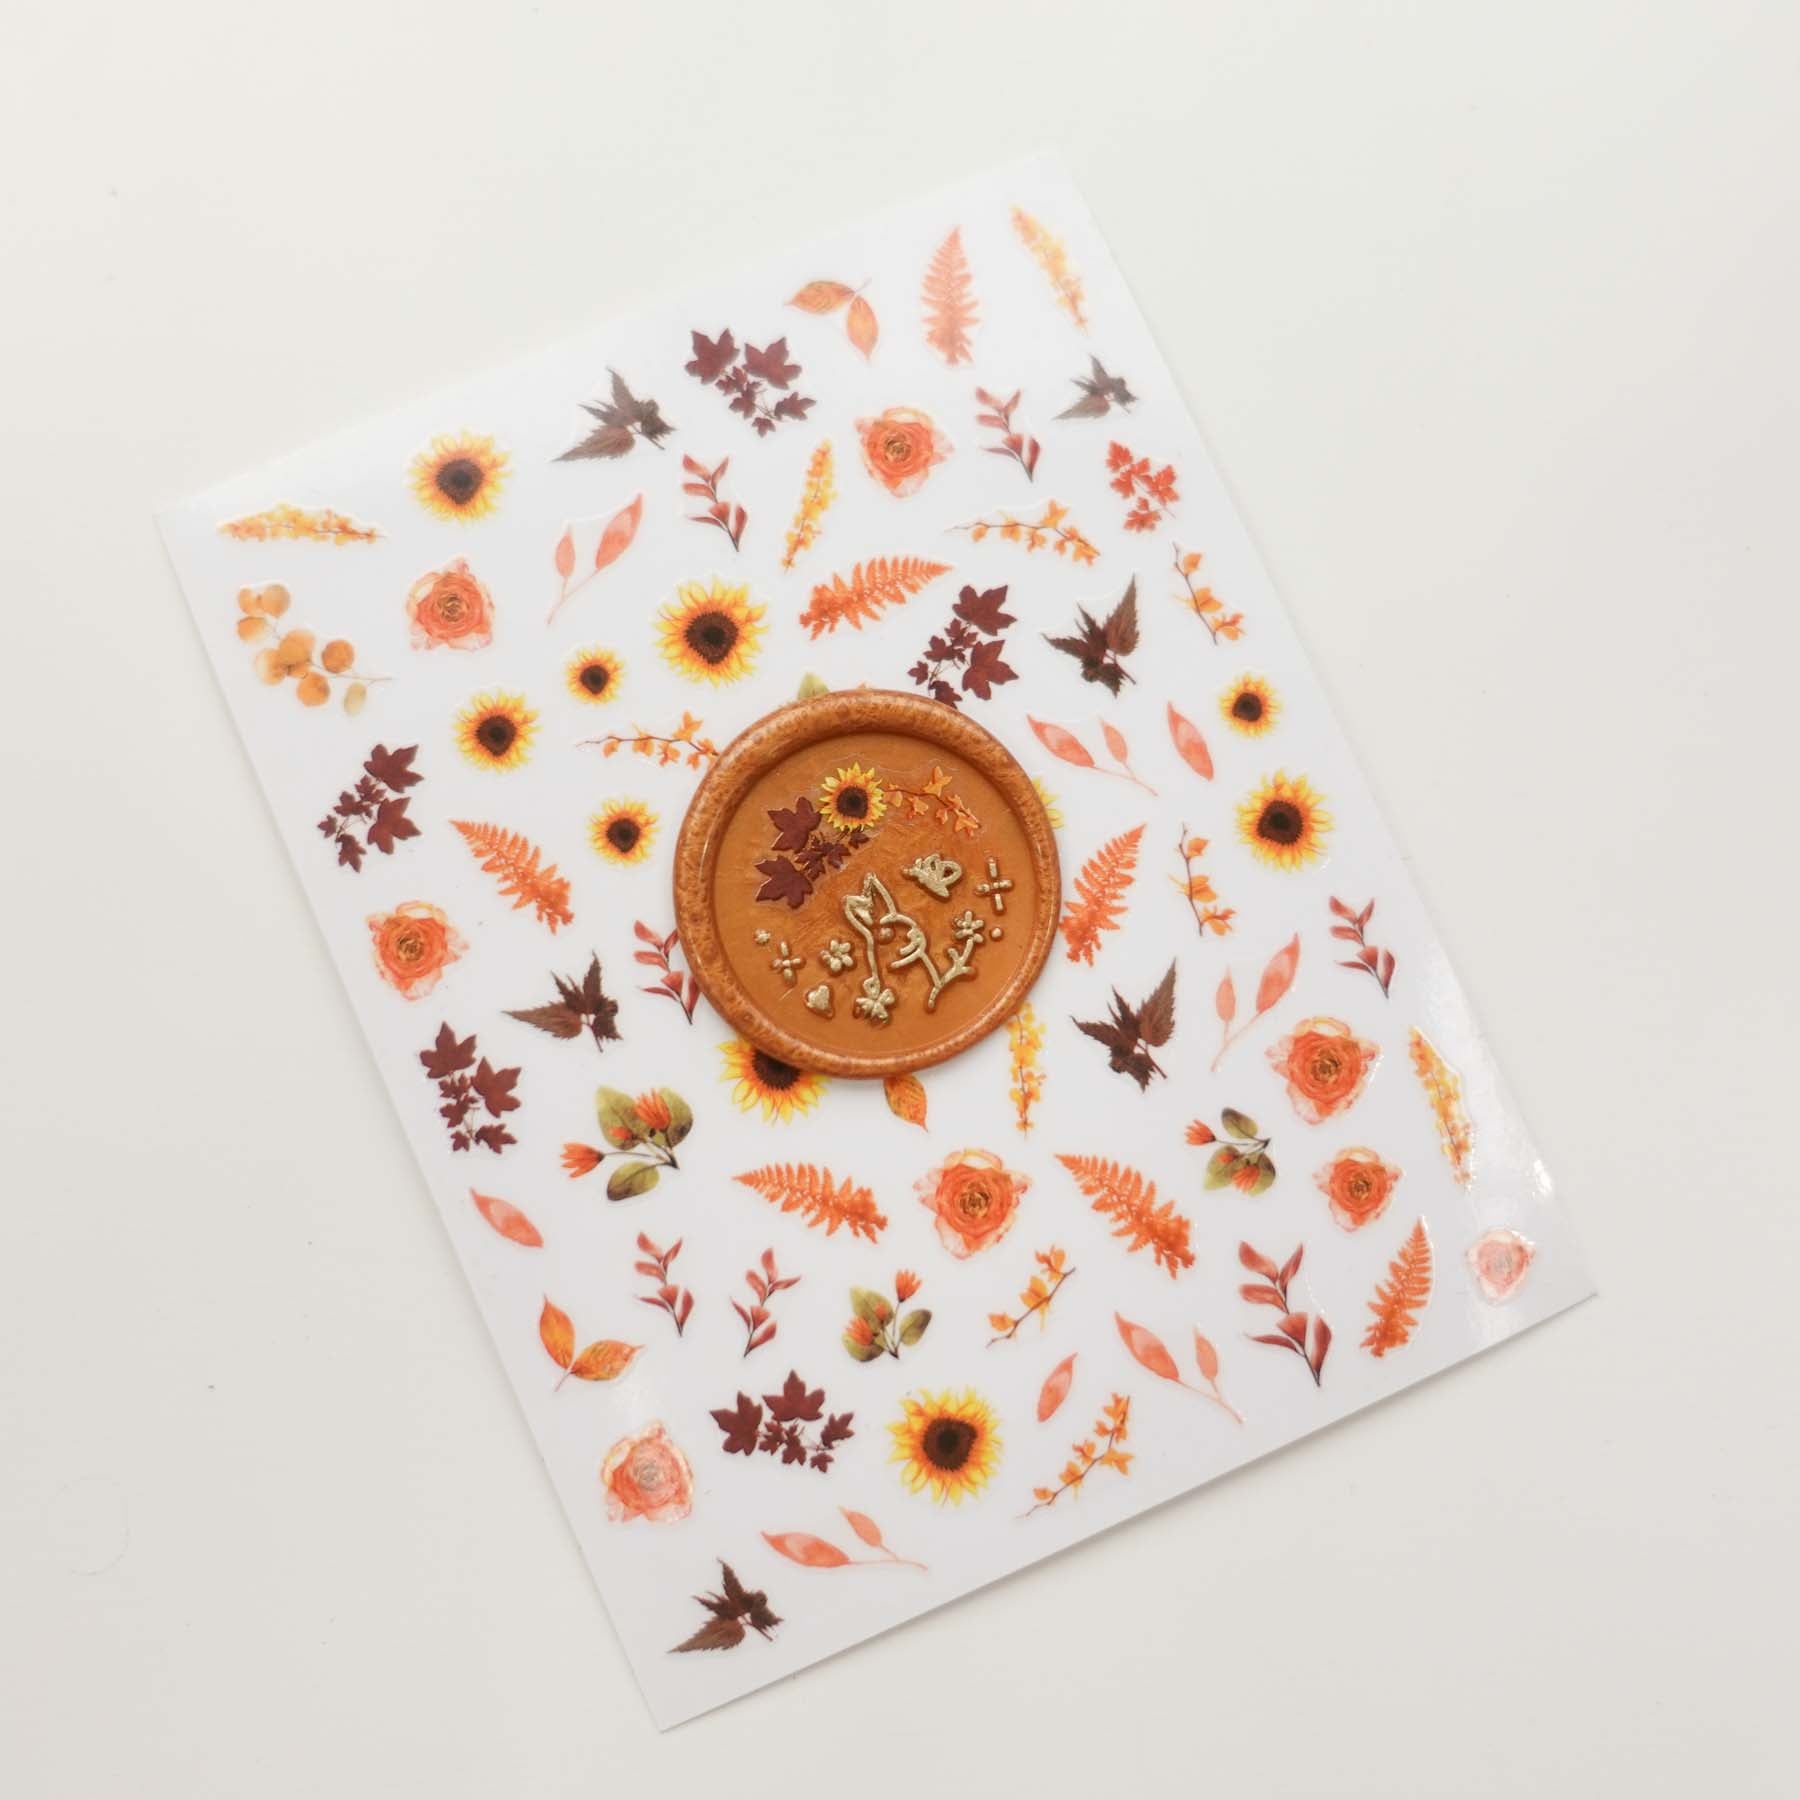 Sunflower Autumn Leaves Clear-Backed Decorative Stickers Sheet